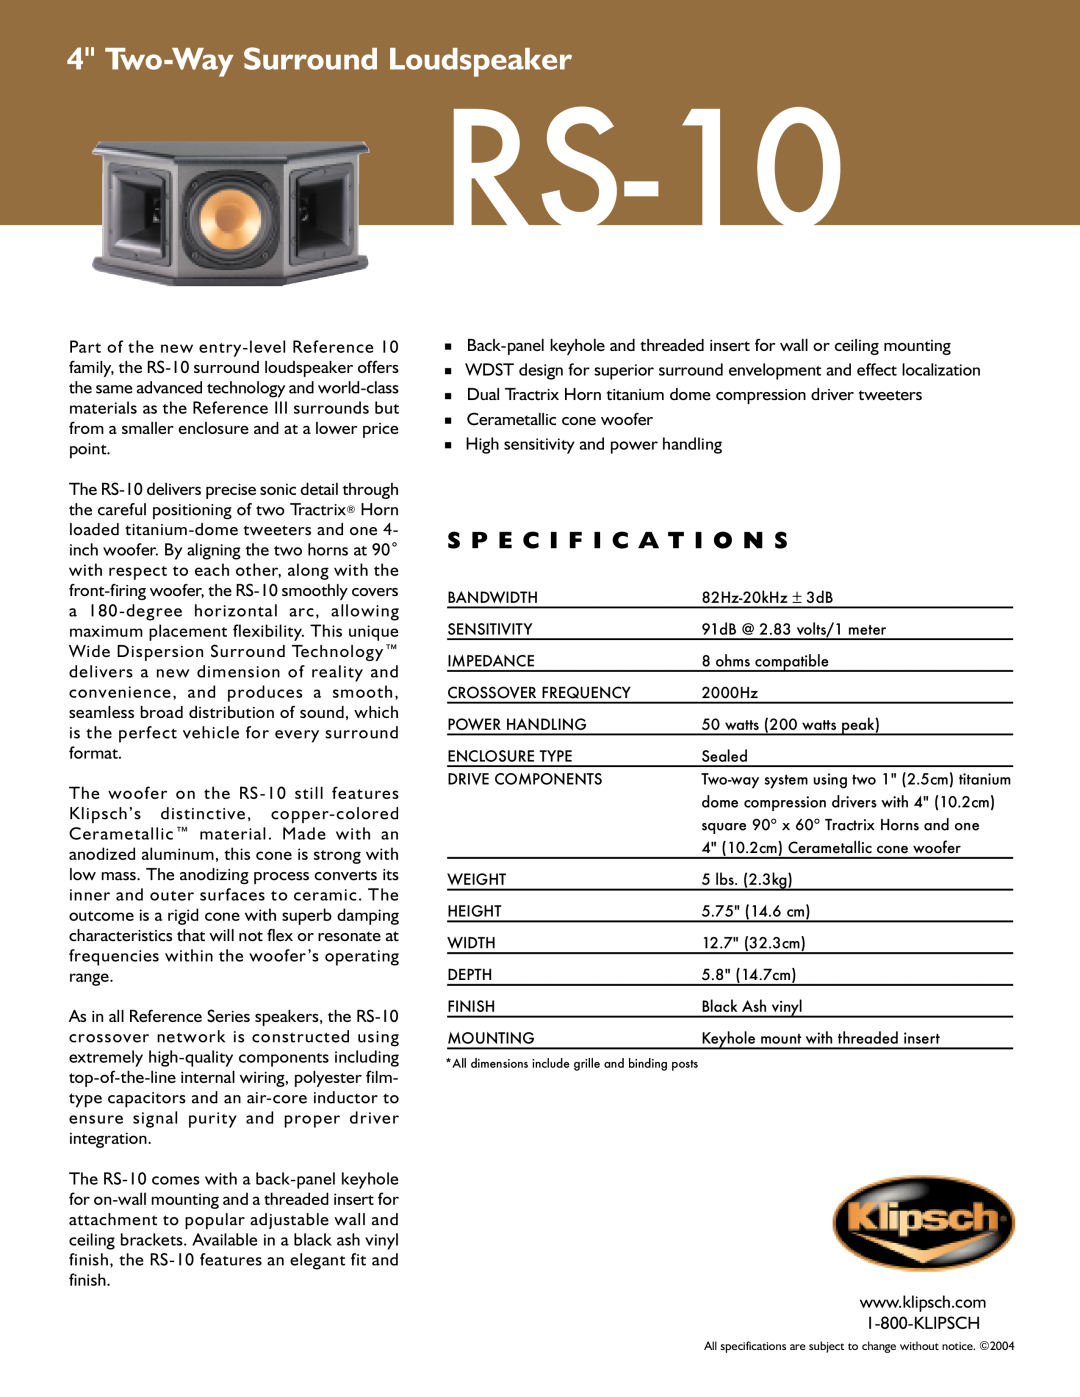 Klipsch RS-10 specifications Two-WaySurround Loudspeaker, S P E C I F I C A T I O N S 